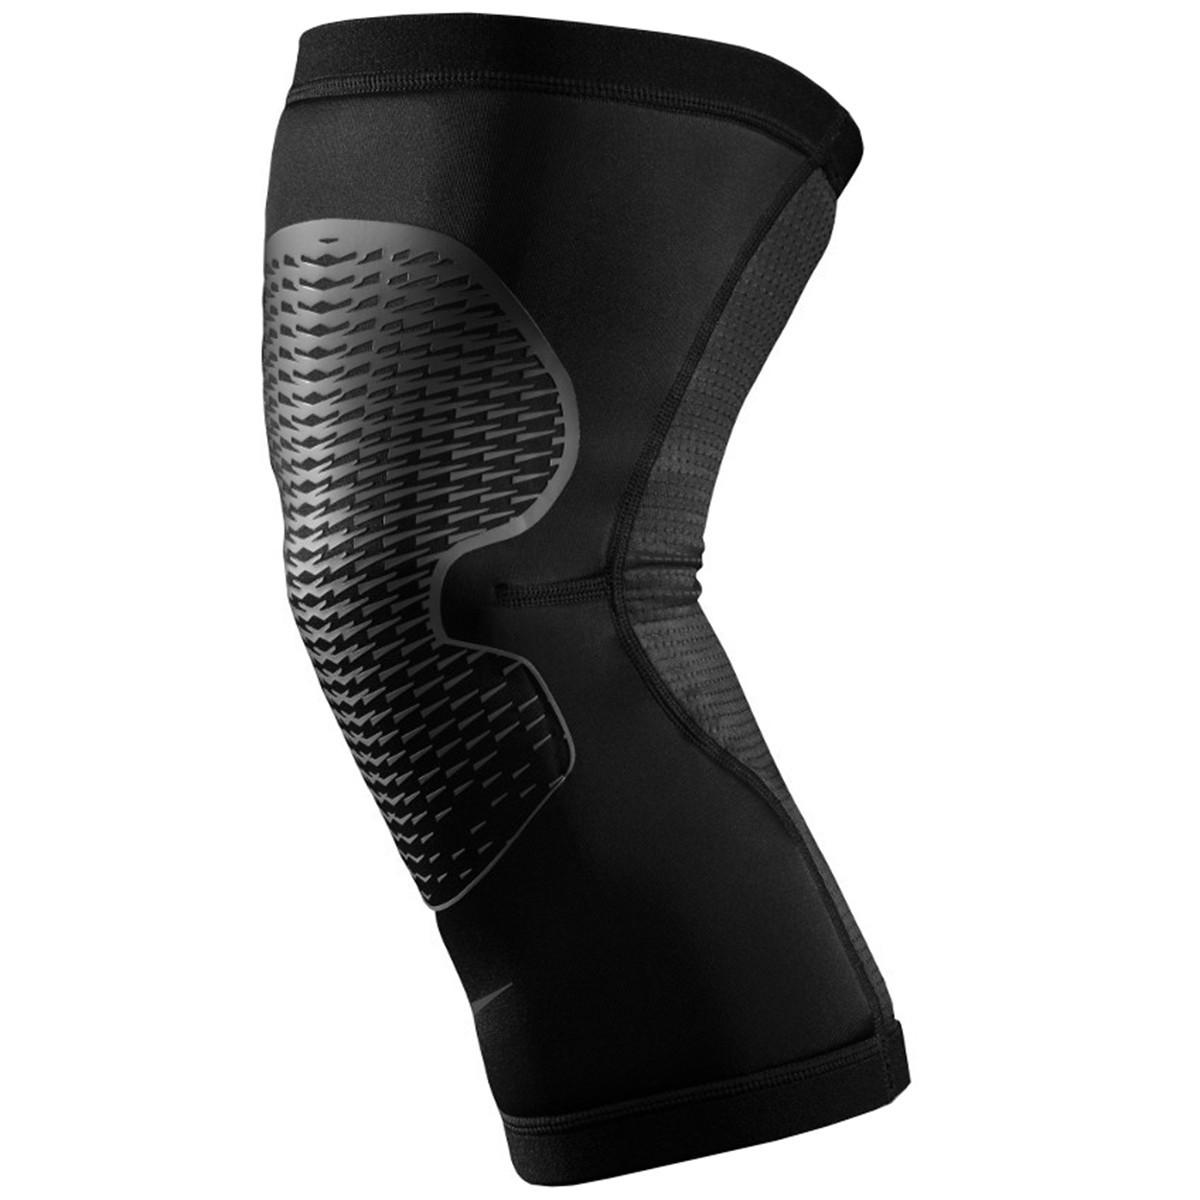 NIKE PRO HYPERSTRONG KNEE SLEEVE 3.0 L B 3.0